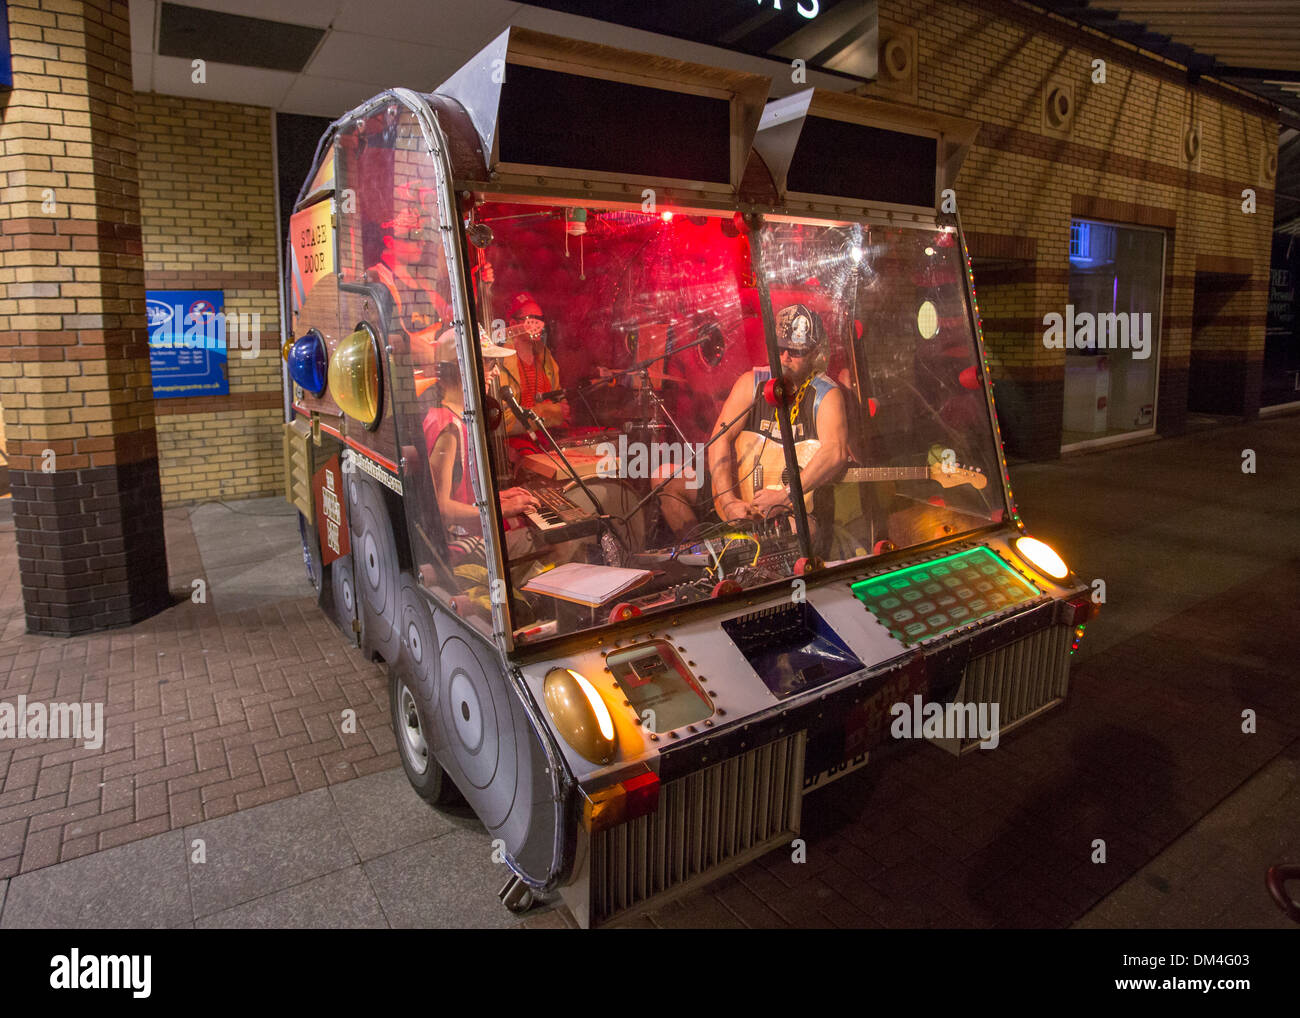 10/10/2013 The Dukes Box, live band juke box. An entire music group inside  a converted caravan play songs Stock Photo - Alamy